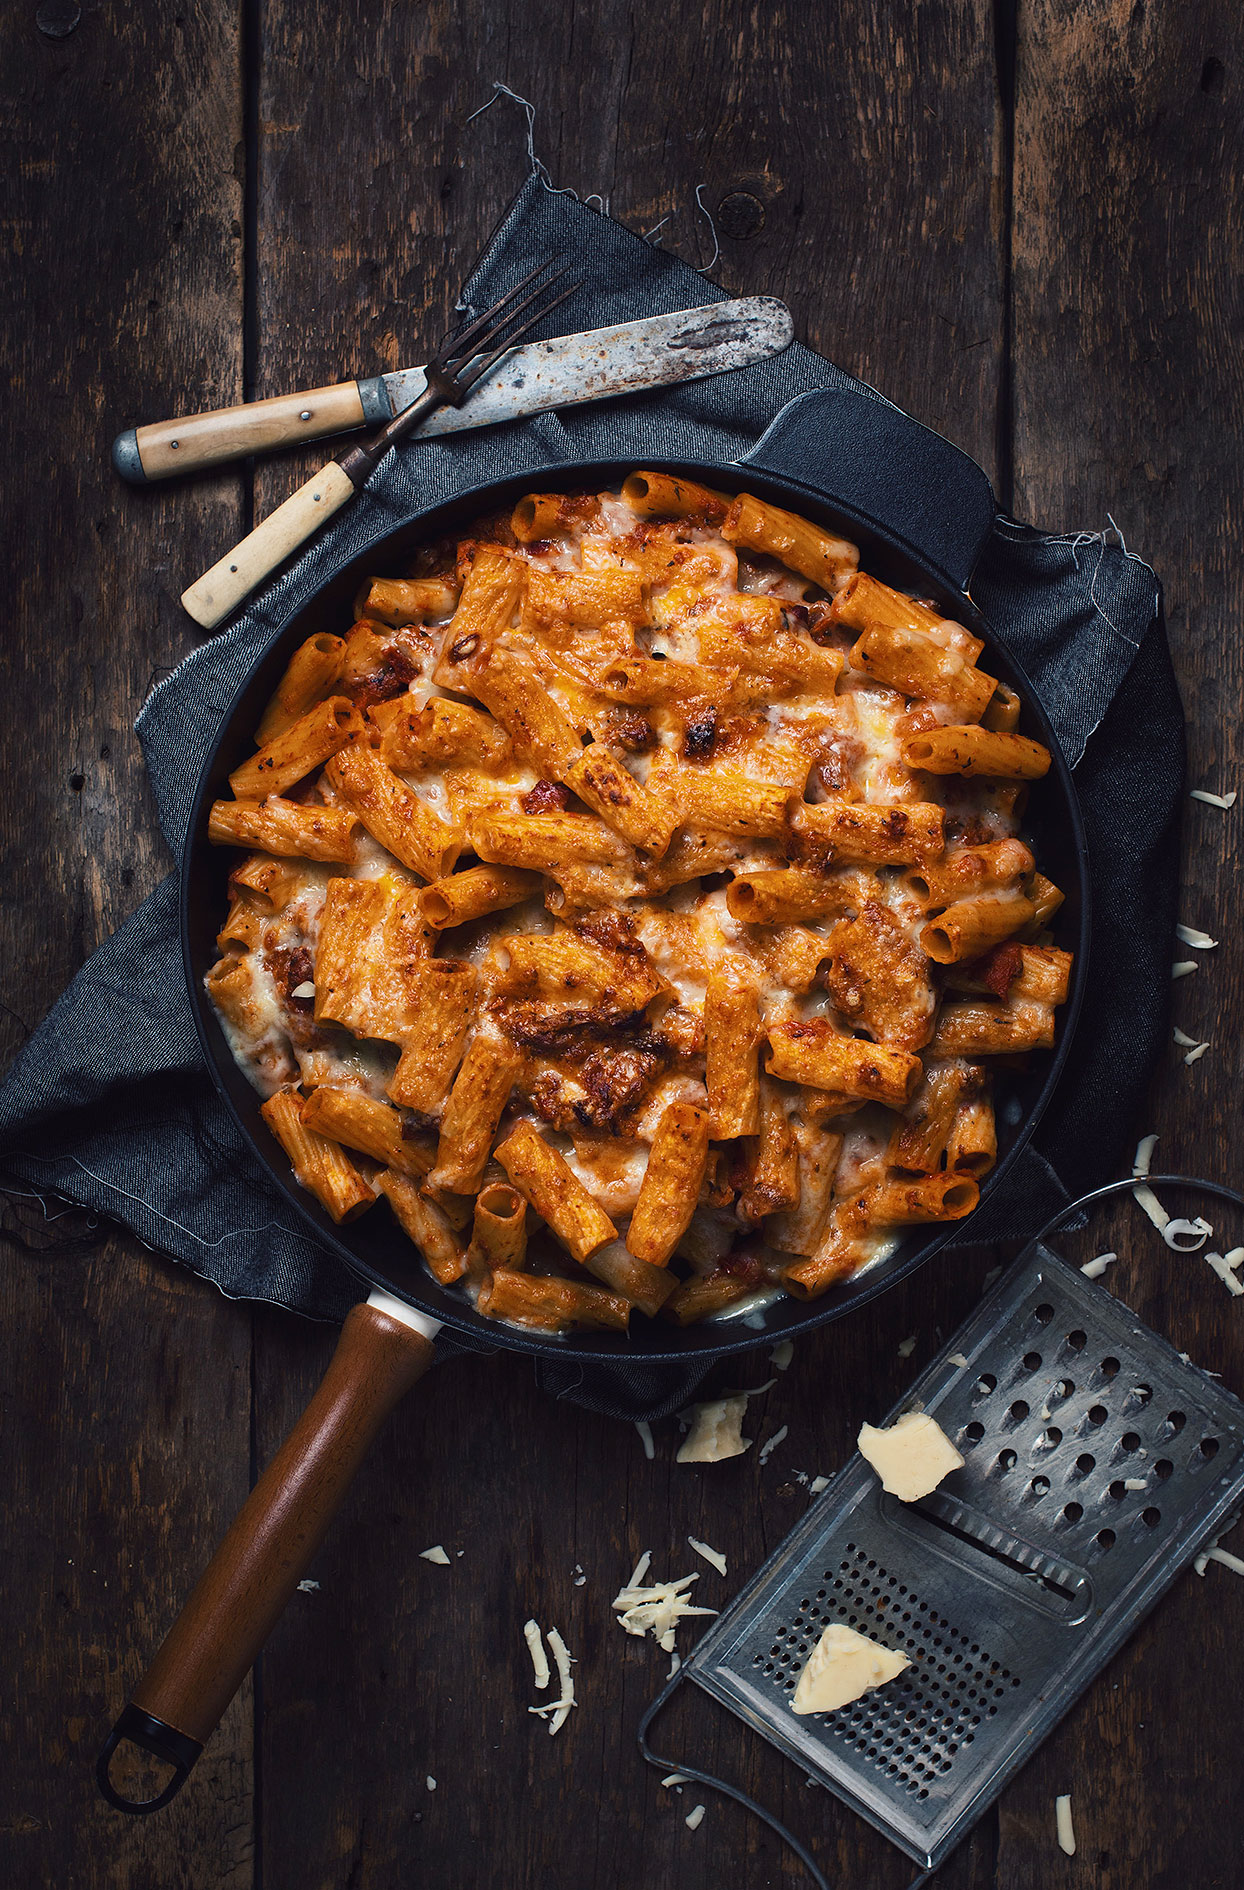 Rigatoni gratin with duck confit, grilled pancetta and tomato sauce